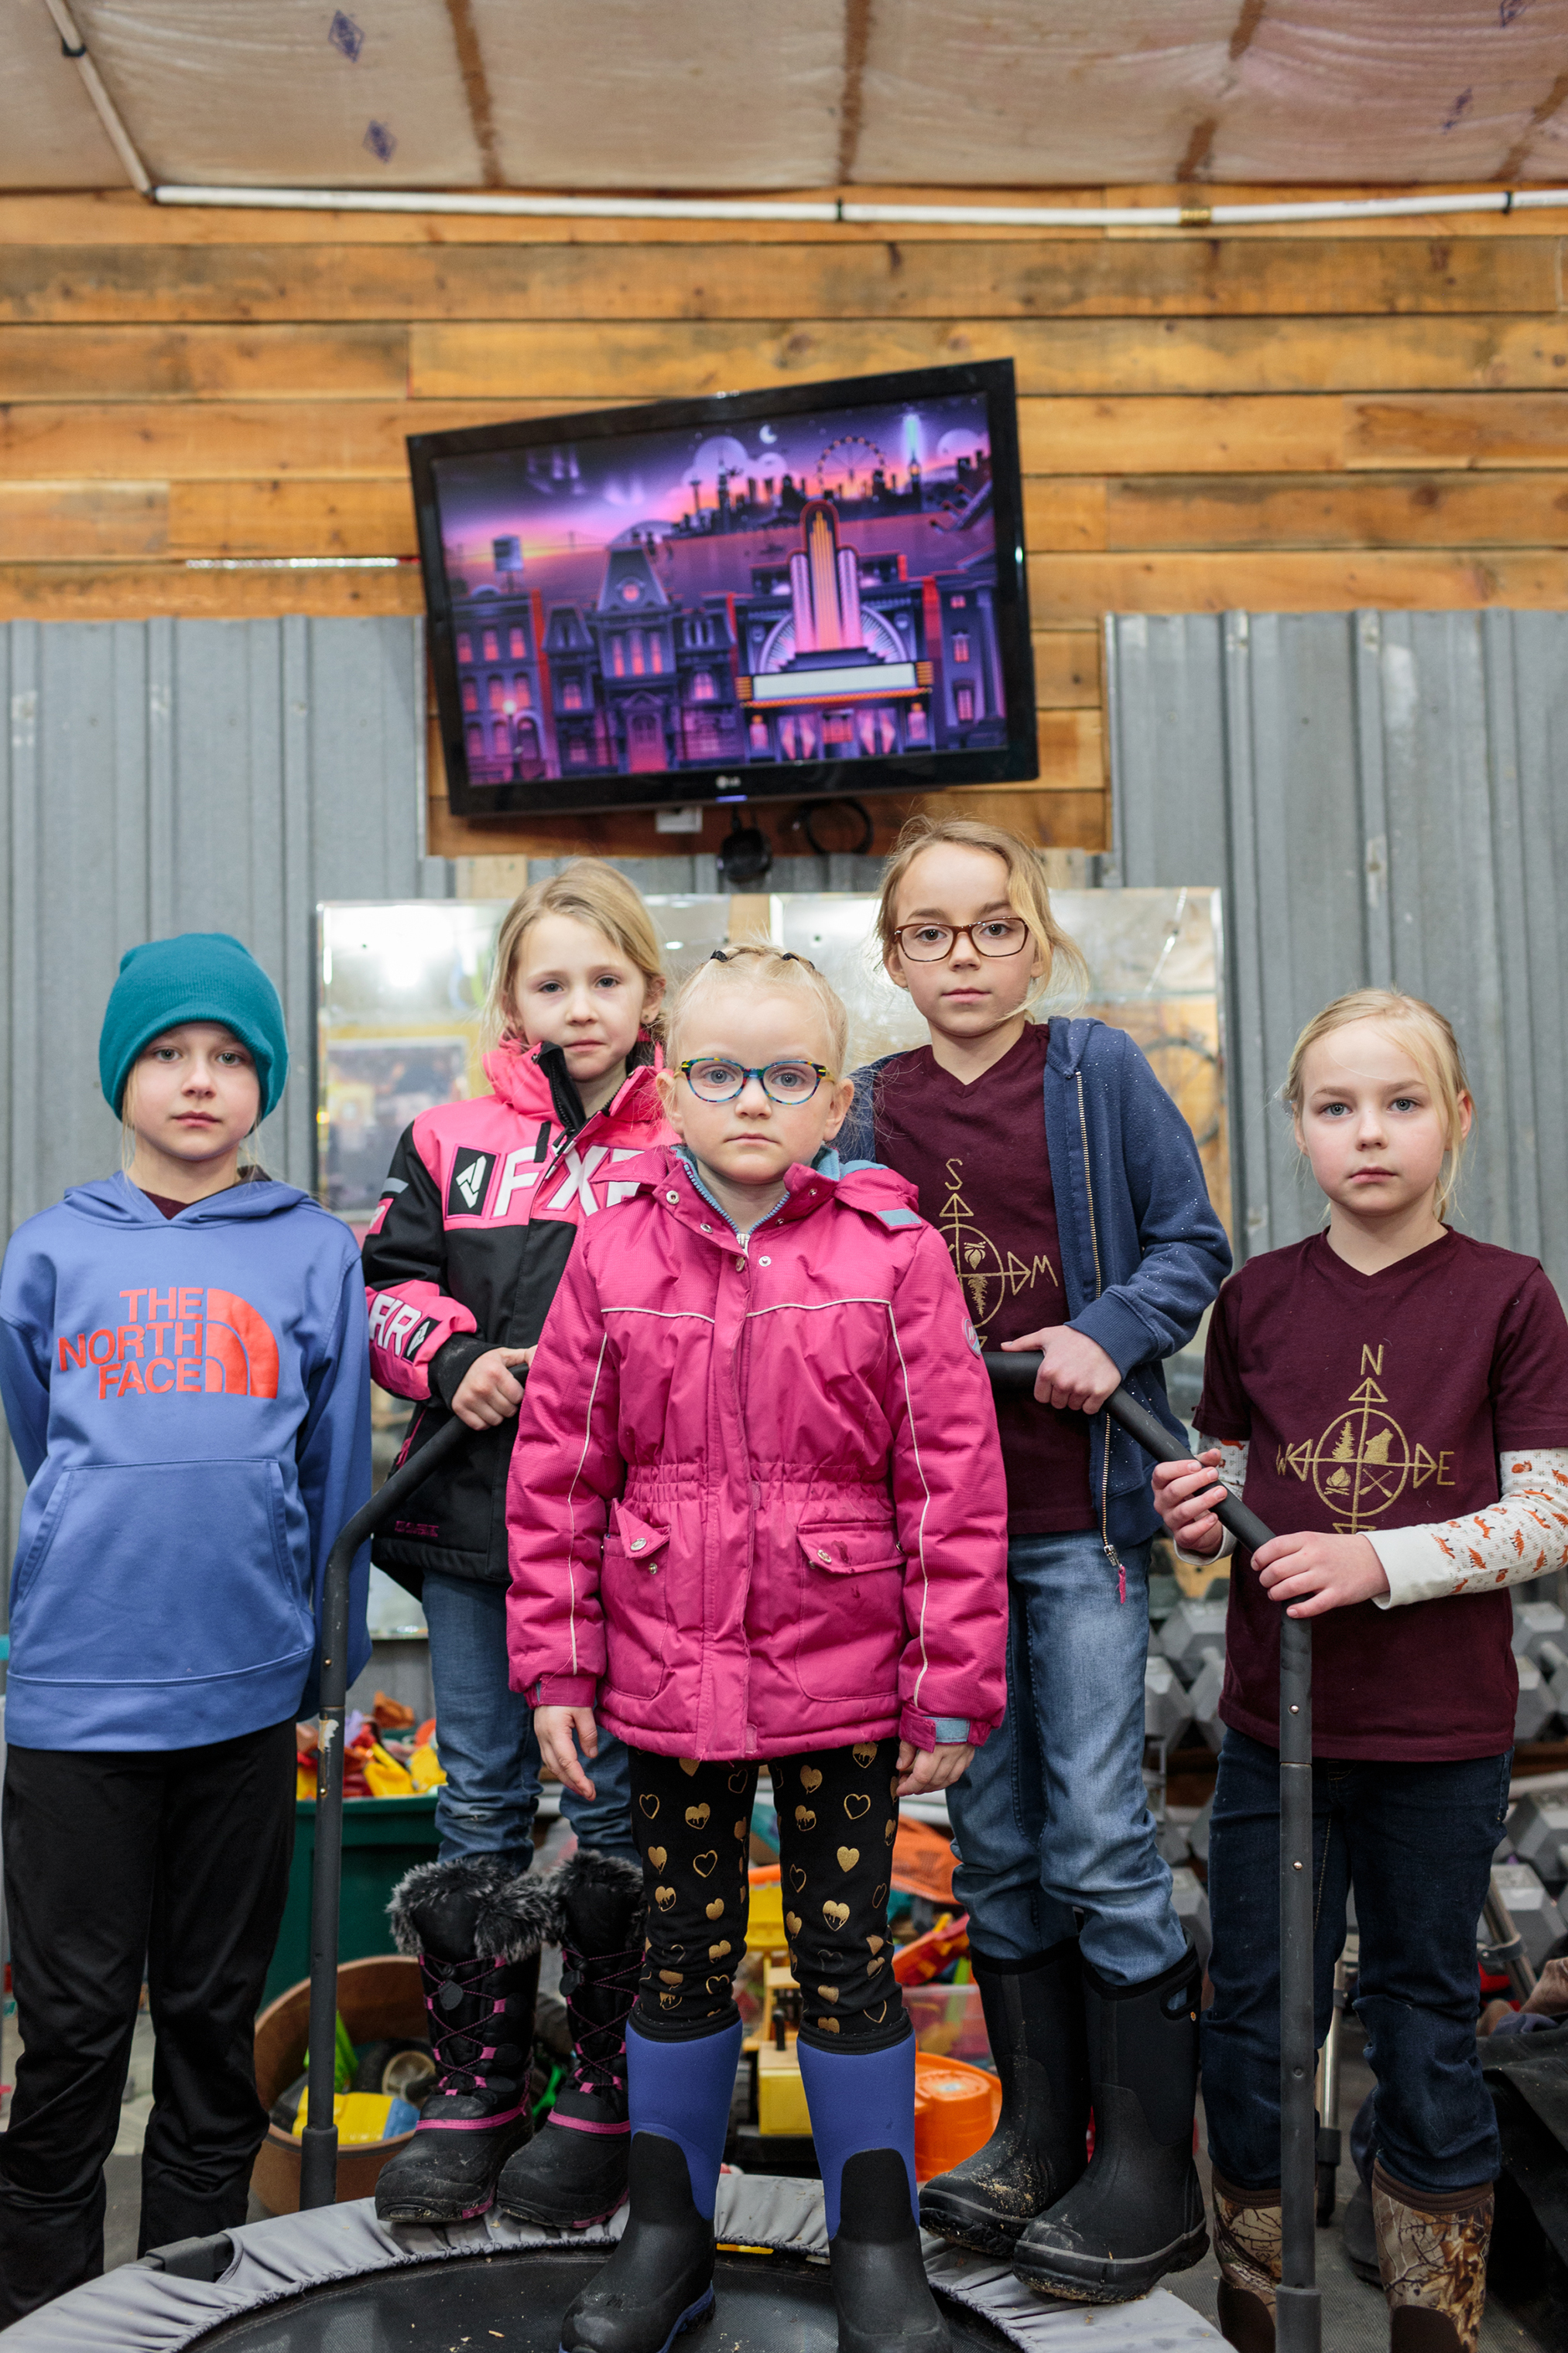 Ava McKeever, Andie McKeever, Iris Knight, Adley Goulet and Emma Goulet stand for a portrait during a weekly "Angle Ladies Adventure Society" in the workshop outside of Sara McGoon, the group leader's home. (Sarah Blesener for TIME)